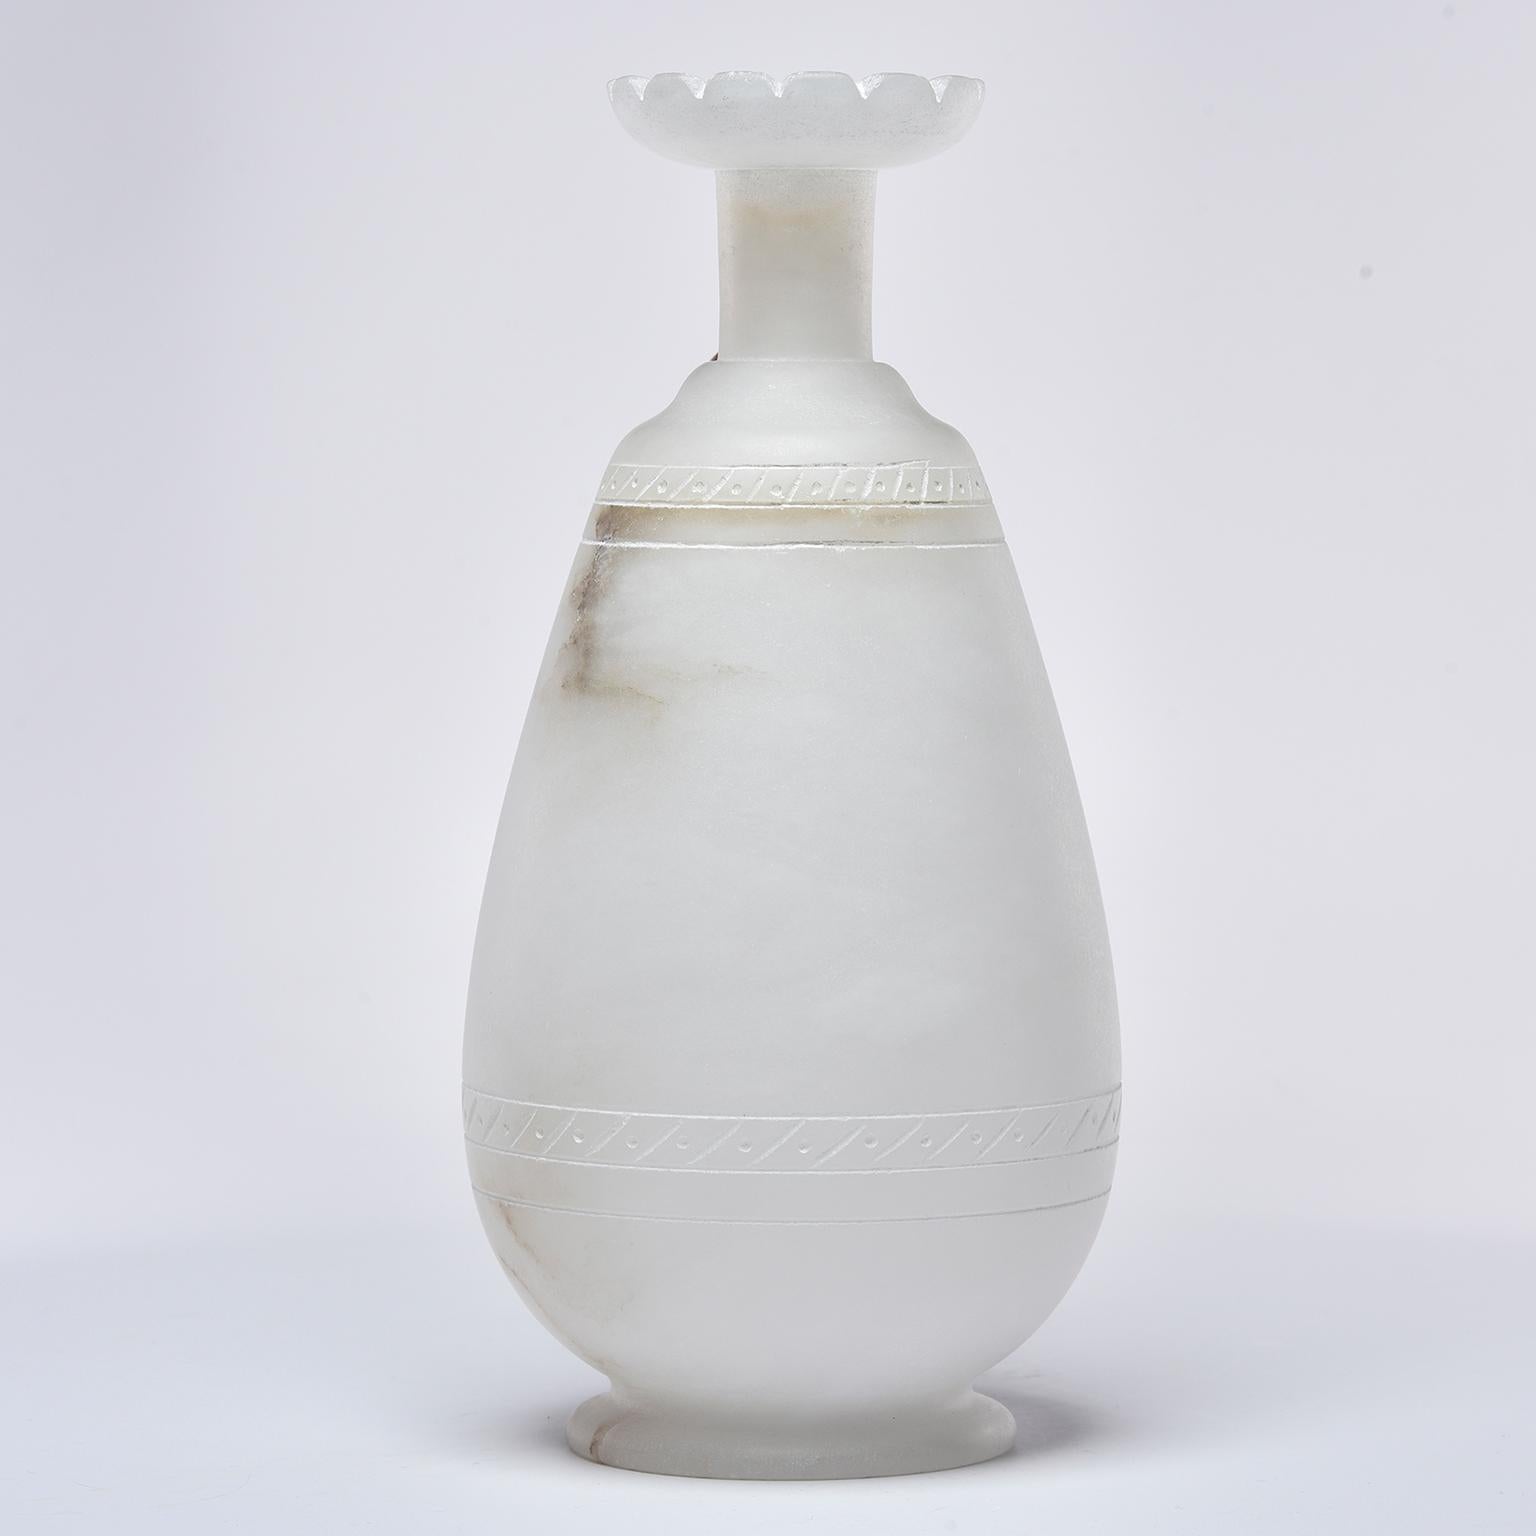 New Italian-made alabaster ewer in pale cream colored alabaster with narrow neck, fluted rim and contrasting brown alabaster handle. Decorative hand carved bands near top and base.